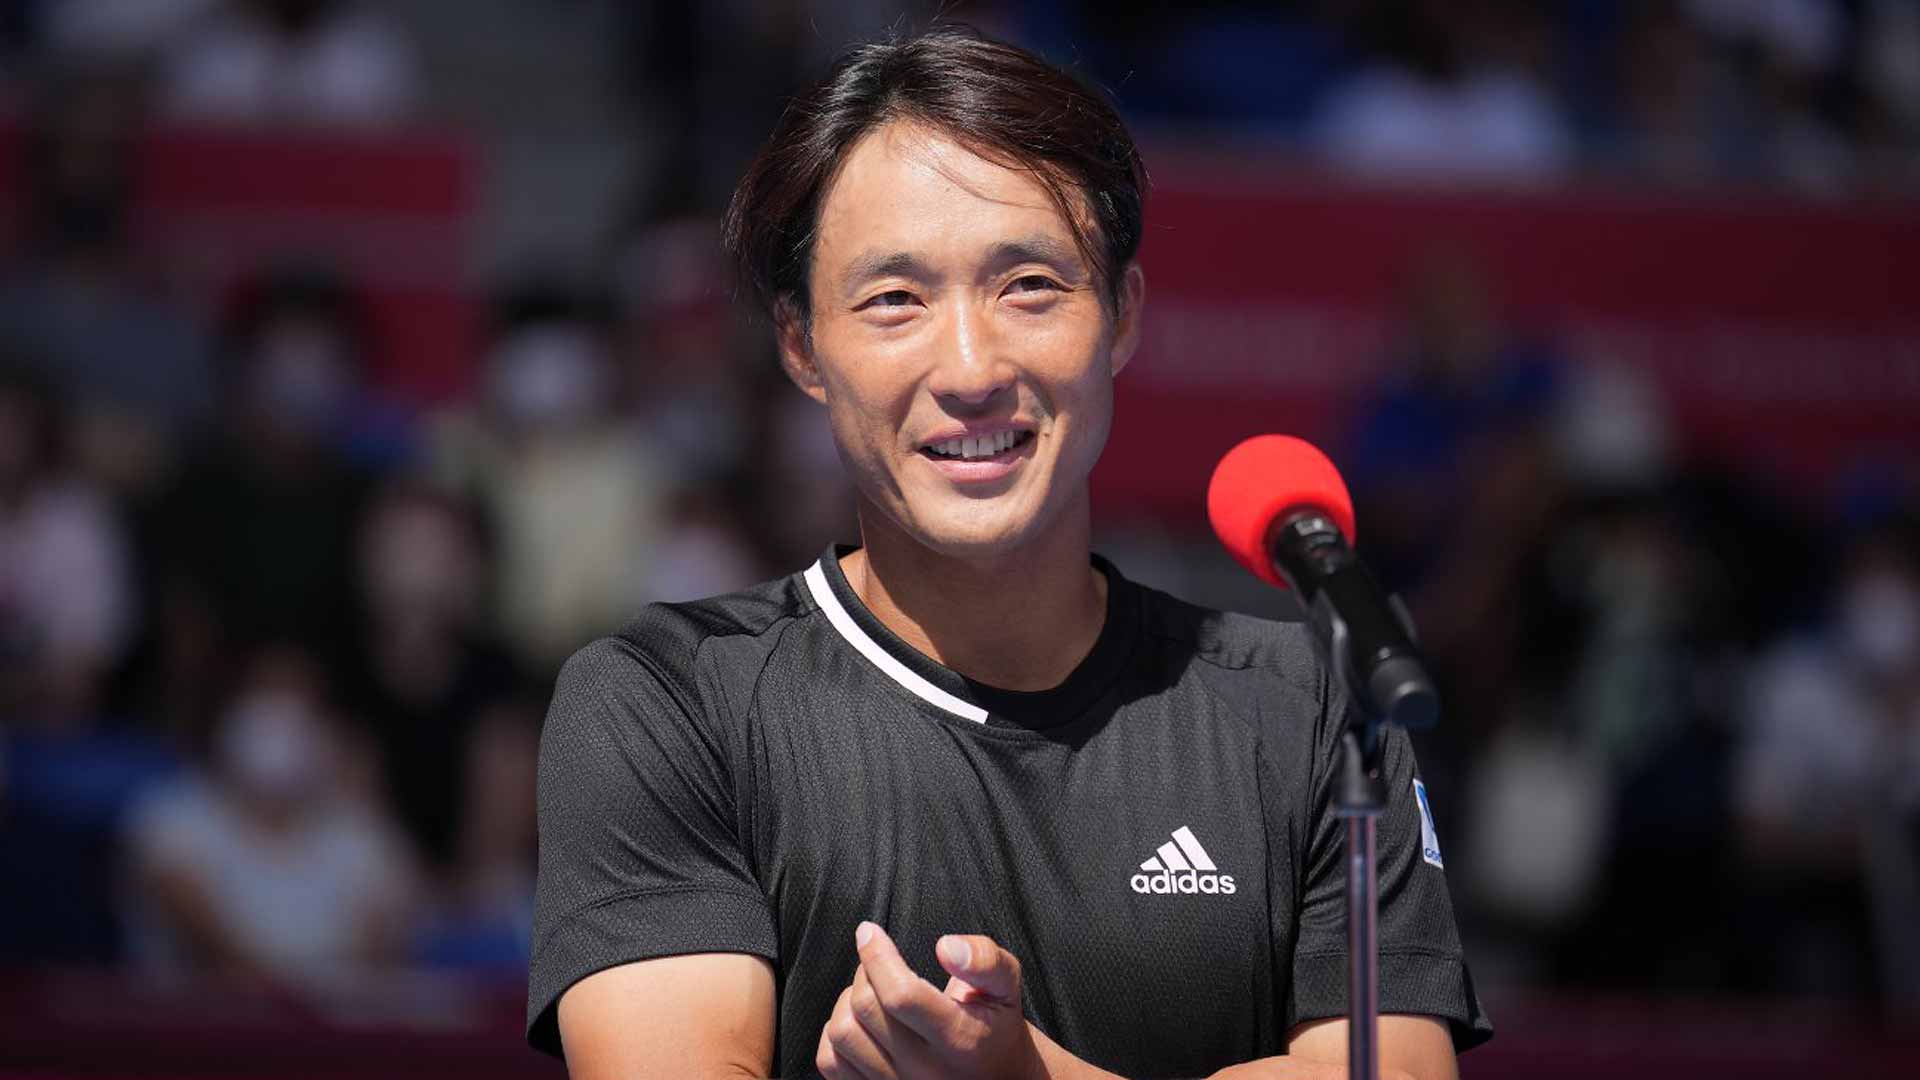 Go Soeda reached his career high of No. 47 in the Pepperstone ATP Rankings in July 2012.